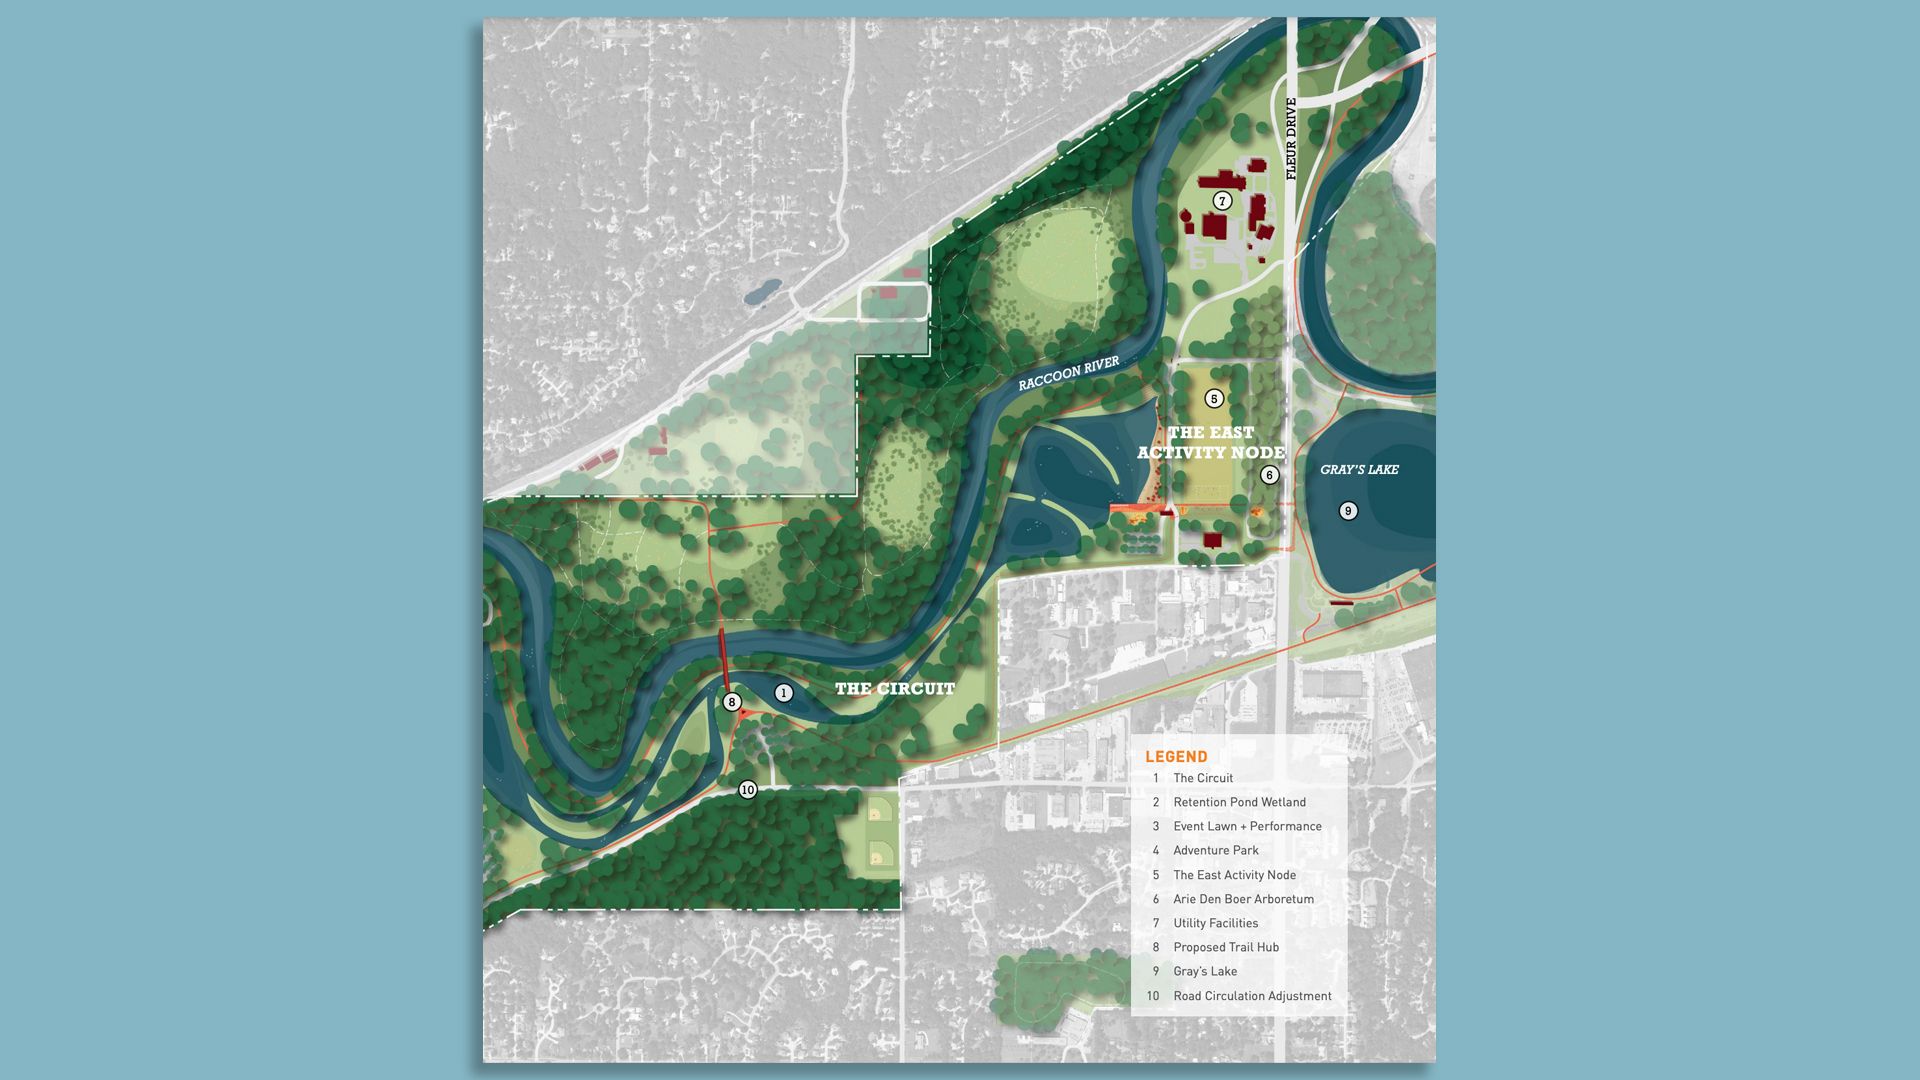 A map of Water Works park